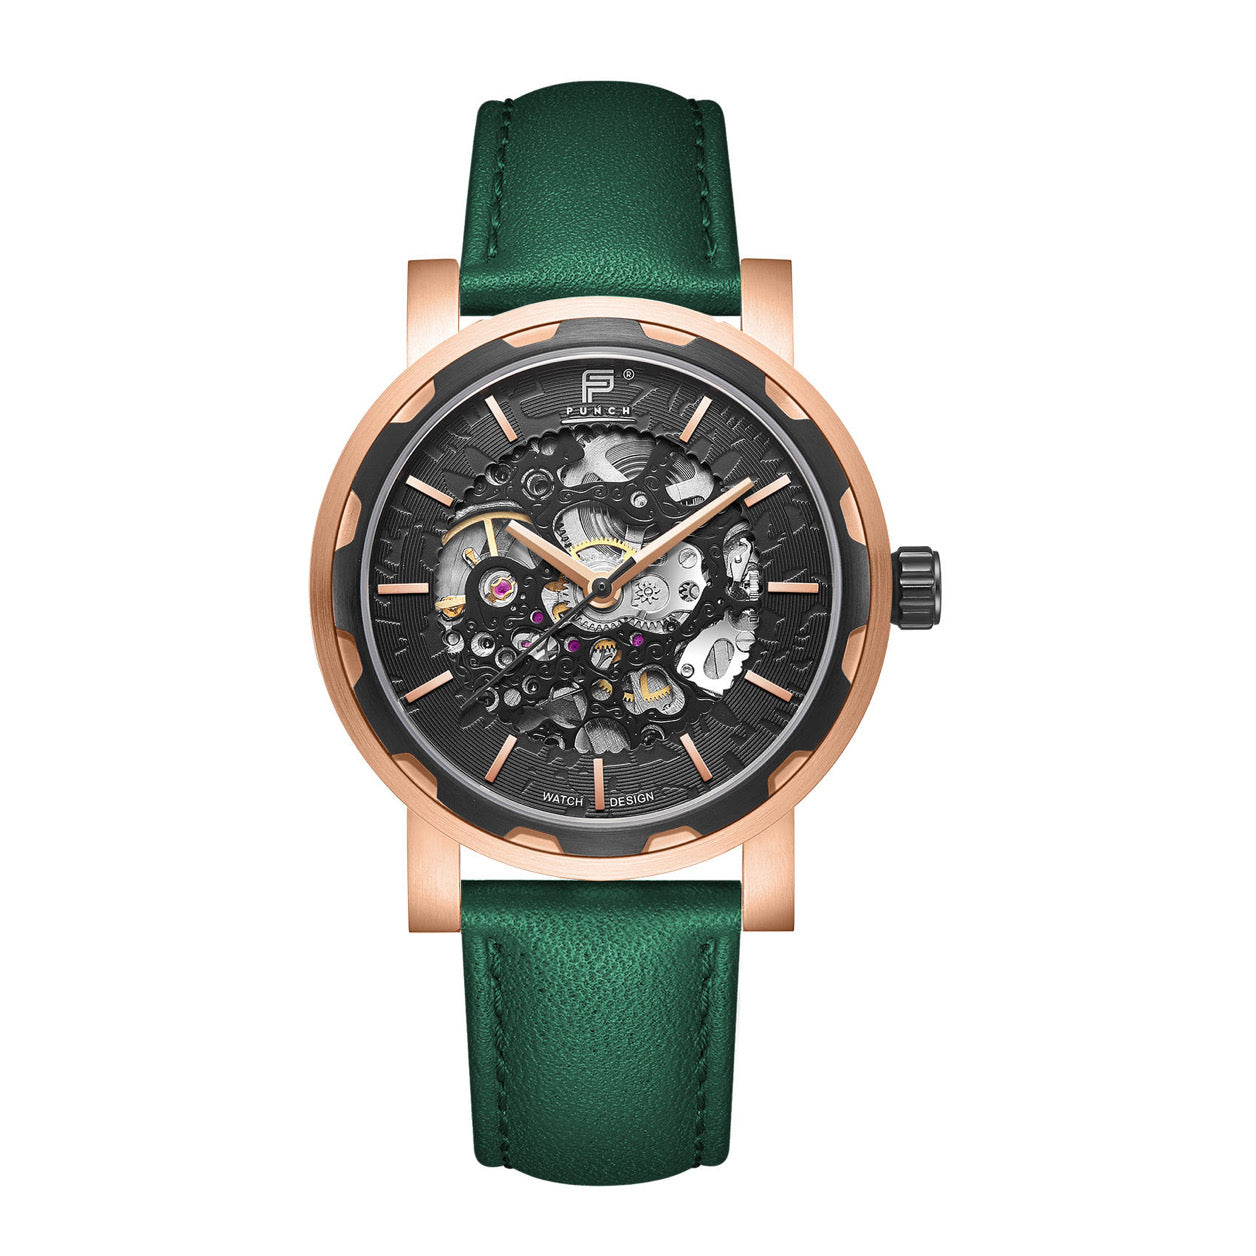 Skeleton Dial Rose Gold Wristwatch with Black Face and Green Leather Band - Close-Up